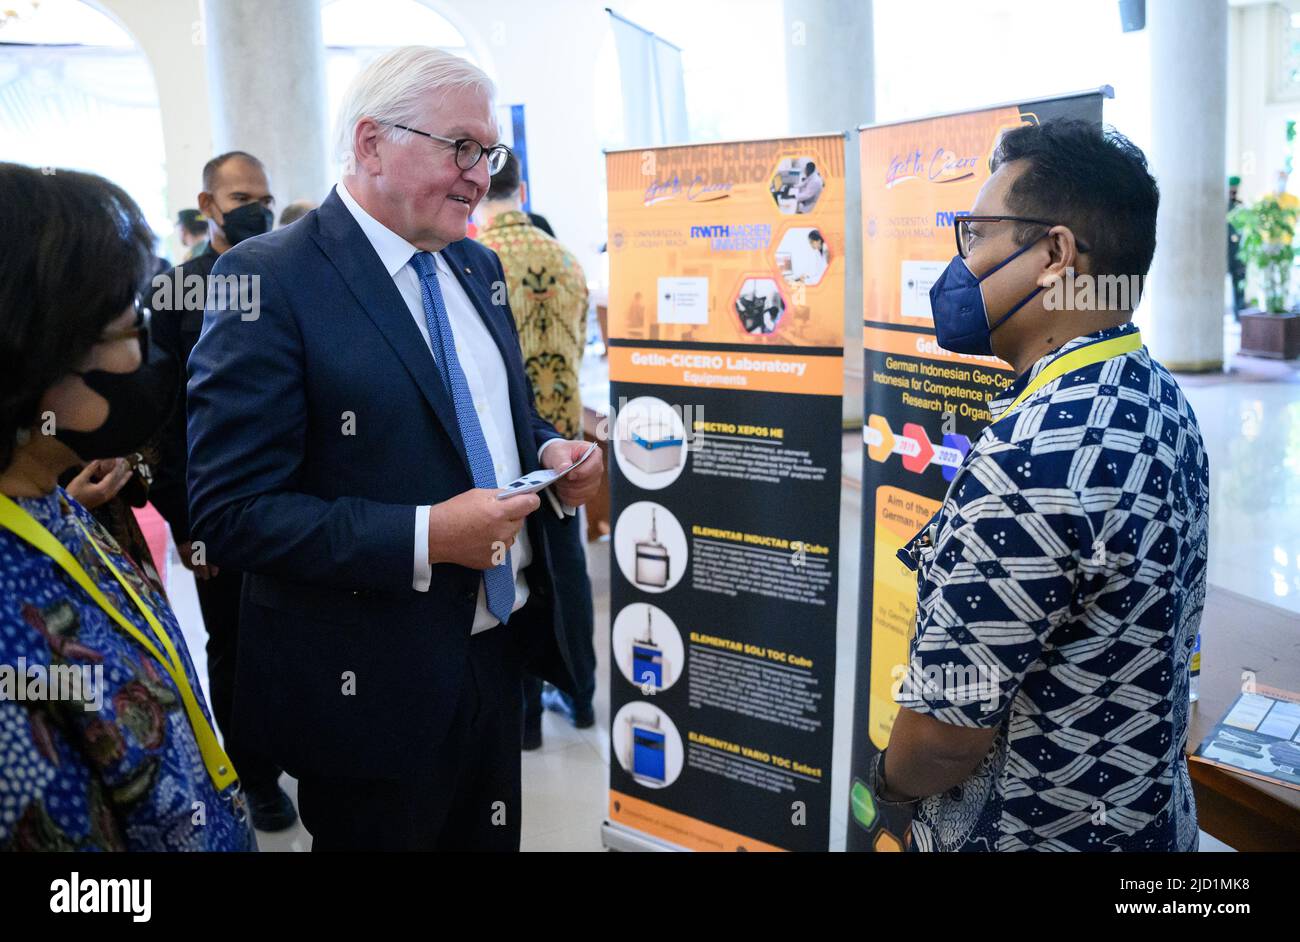 17 June 2022, Indonesia, Yogyakarta: German President Frank-Walter Steinmeier looks at an information booth of a RWTH Aachen University project during a visit to Universitas Gadjah Mada. President Steinmeier is on a two-day visit to Indonesia. He was previously in Singapore for two days. Photo: Bernd von Jutrczenka/dpa Stock Photo